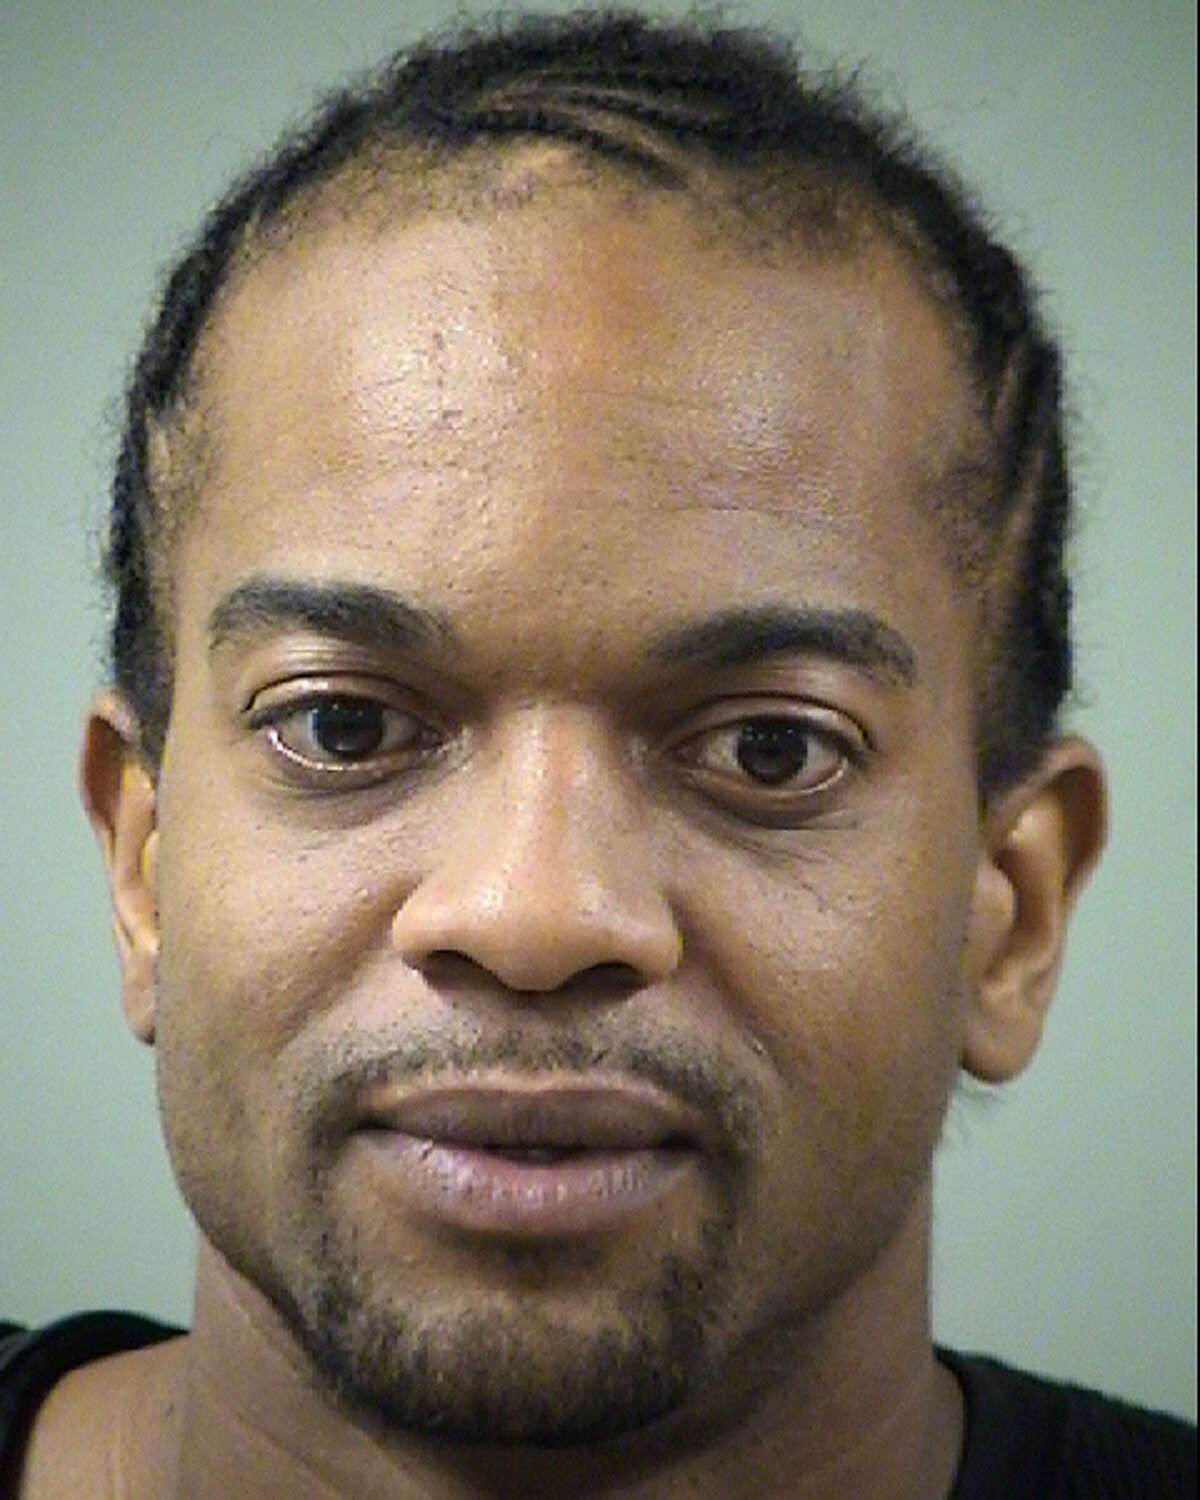 San Antonio Police Chief William McManus has said Adrian Hardeman, seen here in an undated mugshot, is the suspect in the fatal shooting of a woman and kidnapping of a 1-year-old child on Monday, June 2, 2017, at a North Side apartment. Hardeman was later shot dead by law enforcement in a neighboring county.